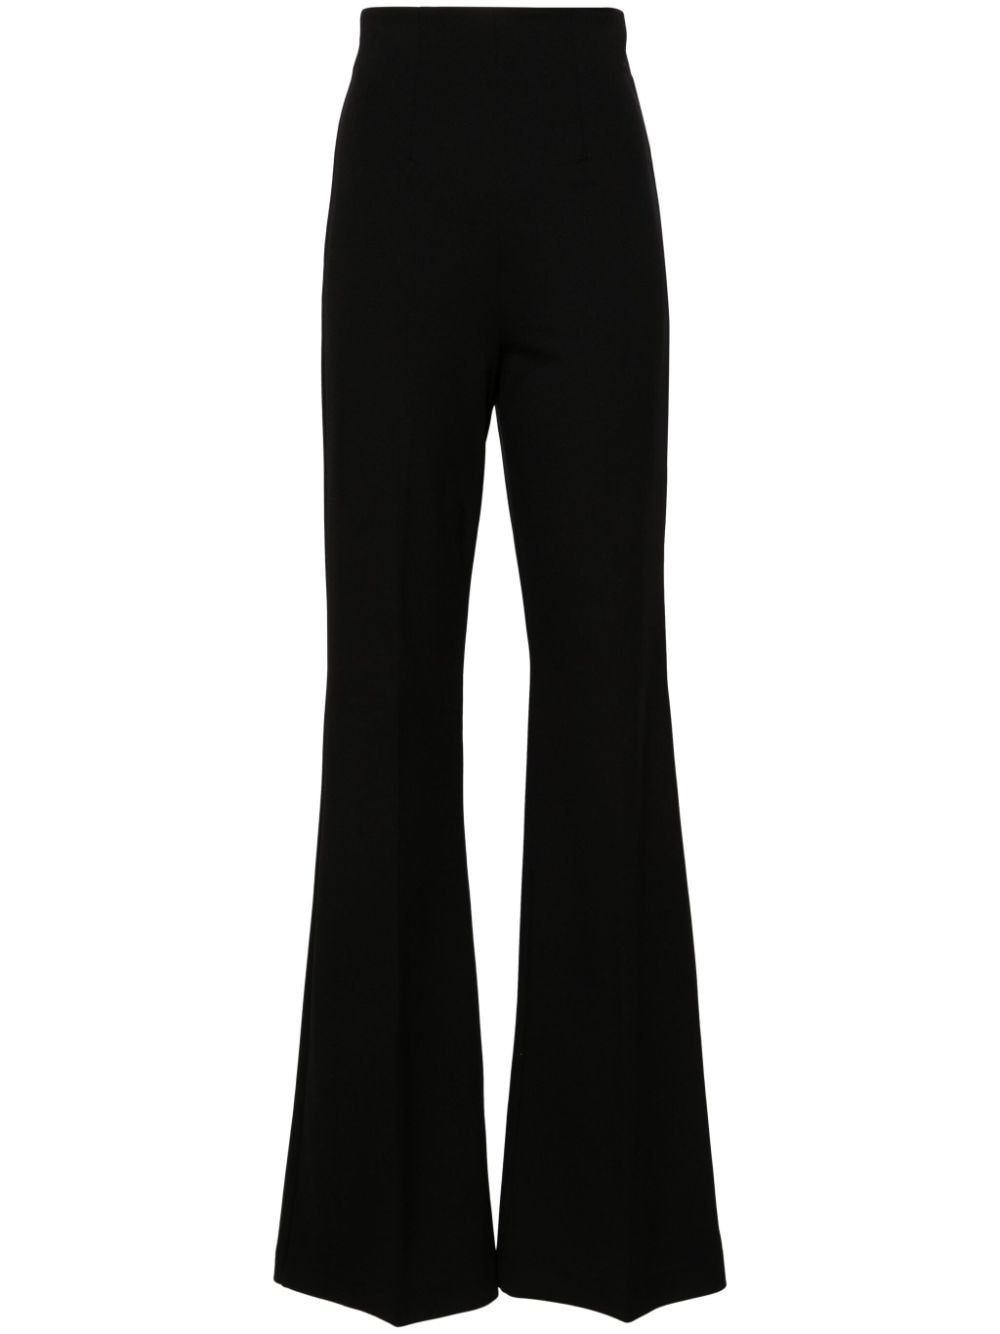 Olea straight tailored trousers - 1